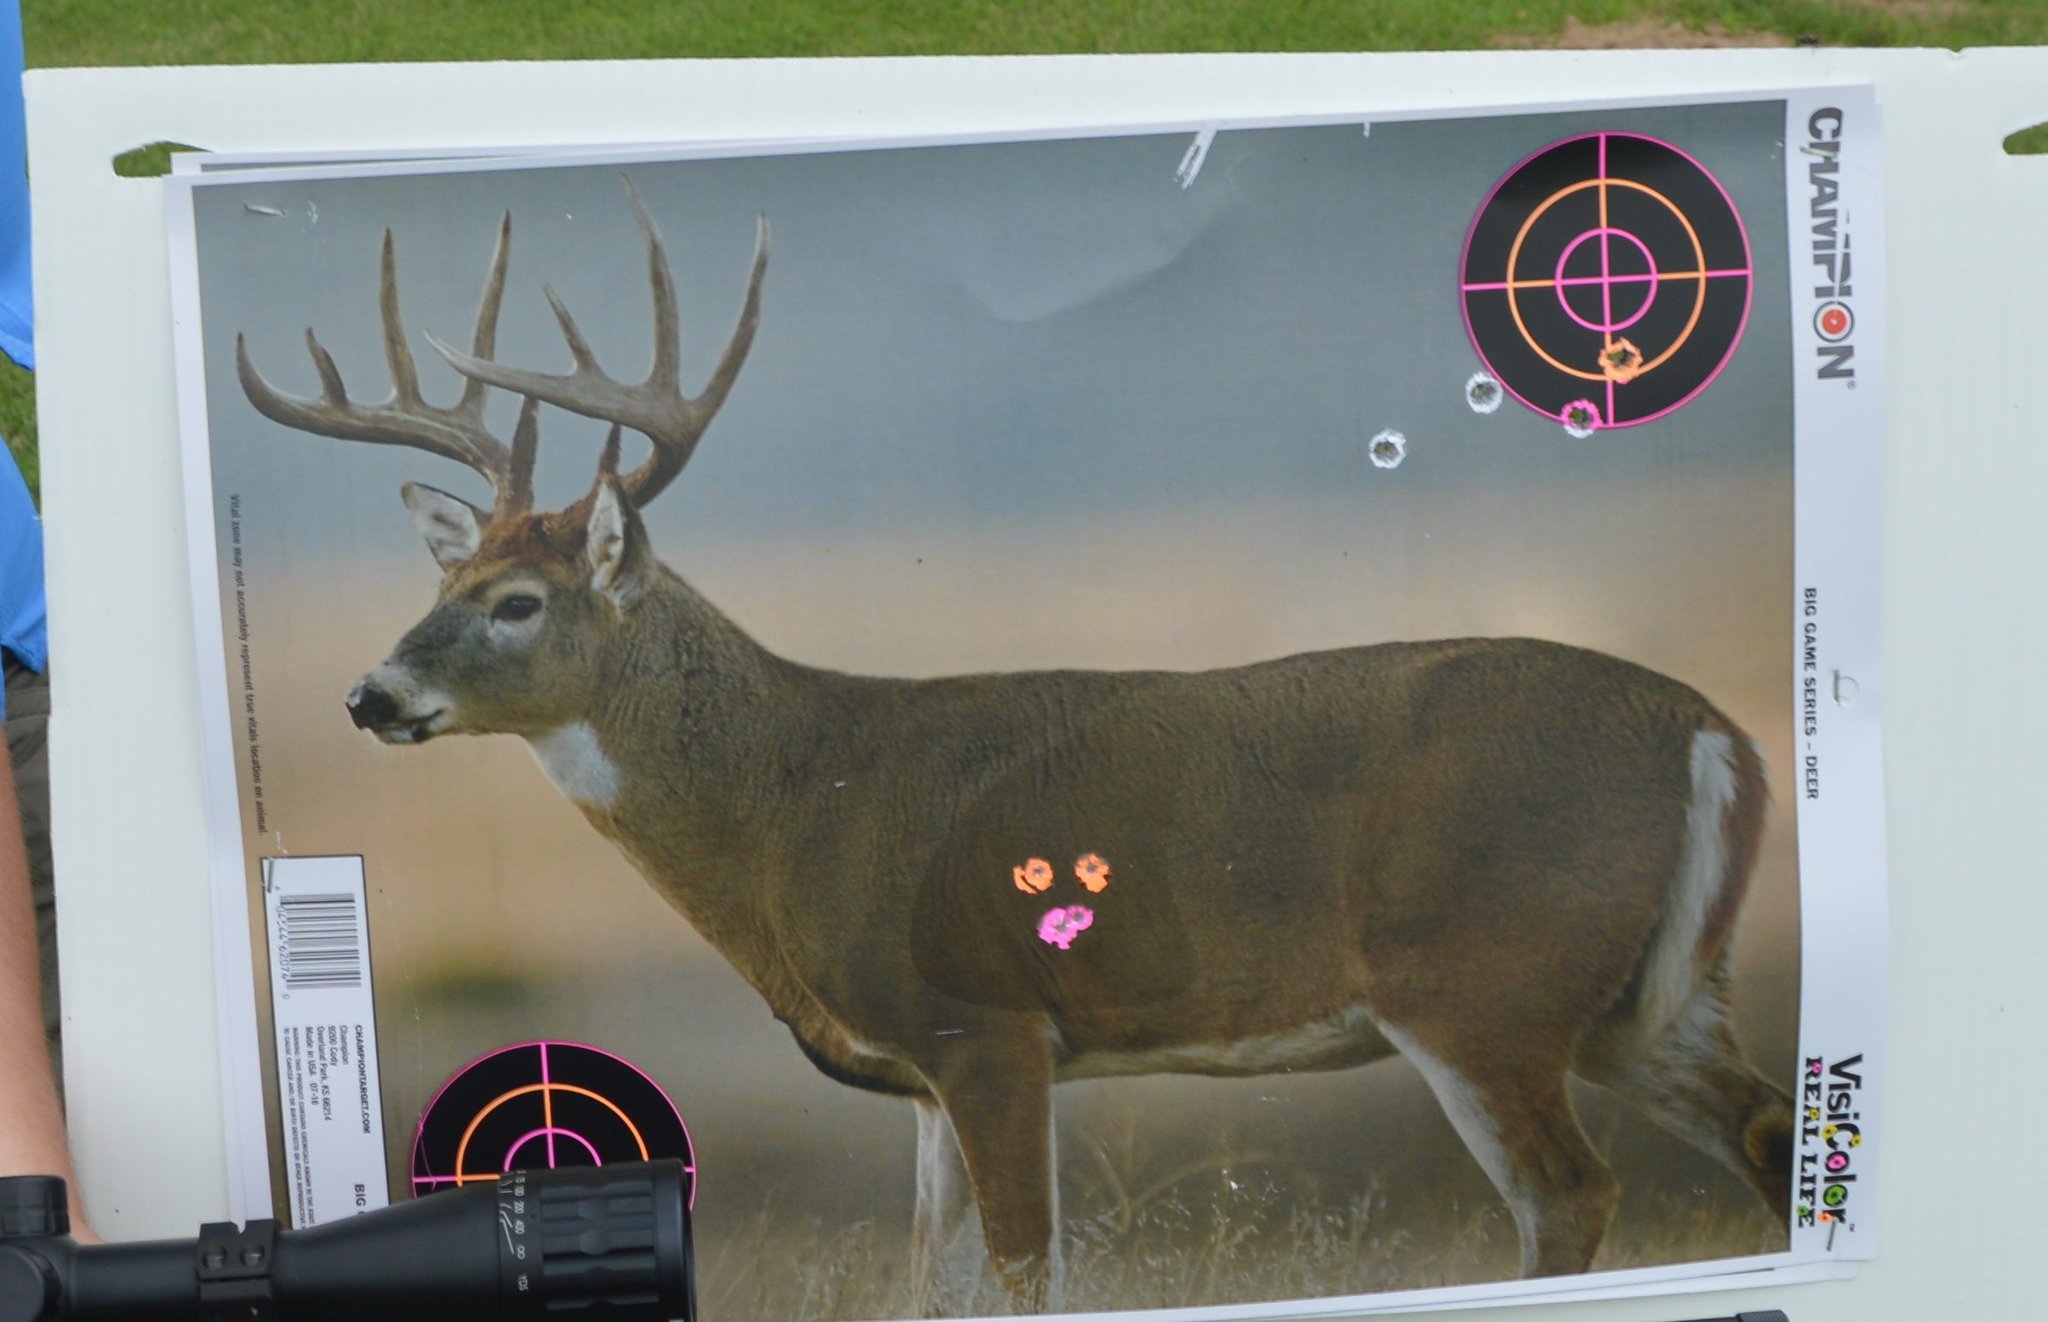 Champion's new VisiColor Real Life Big Game targets are a great sight-in option for hunters. Available in either whitetail, antelope, or bear, these targets are have vital areas marked by different colors. Here you can see heart shots show up as pink, while lung and outer vitals are orange. Smaller bullseyes in the corners allow for further target practice. (Photo: Kristin Alberts)